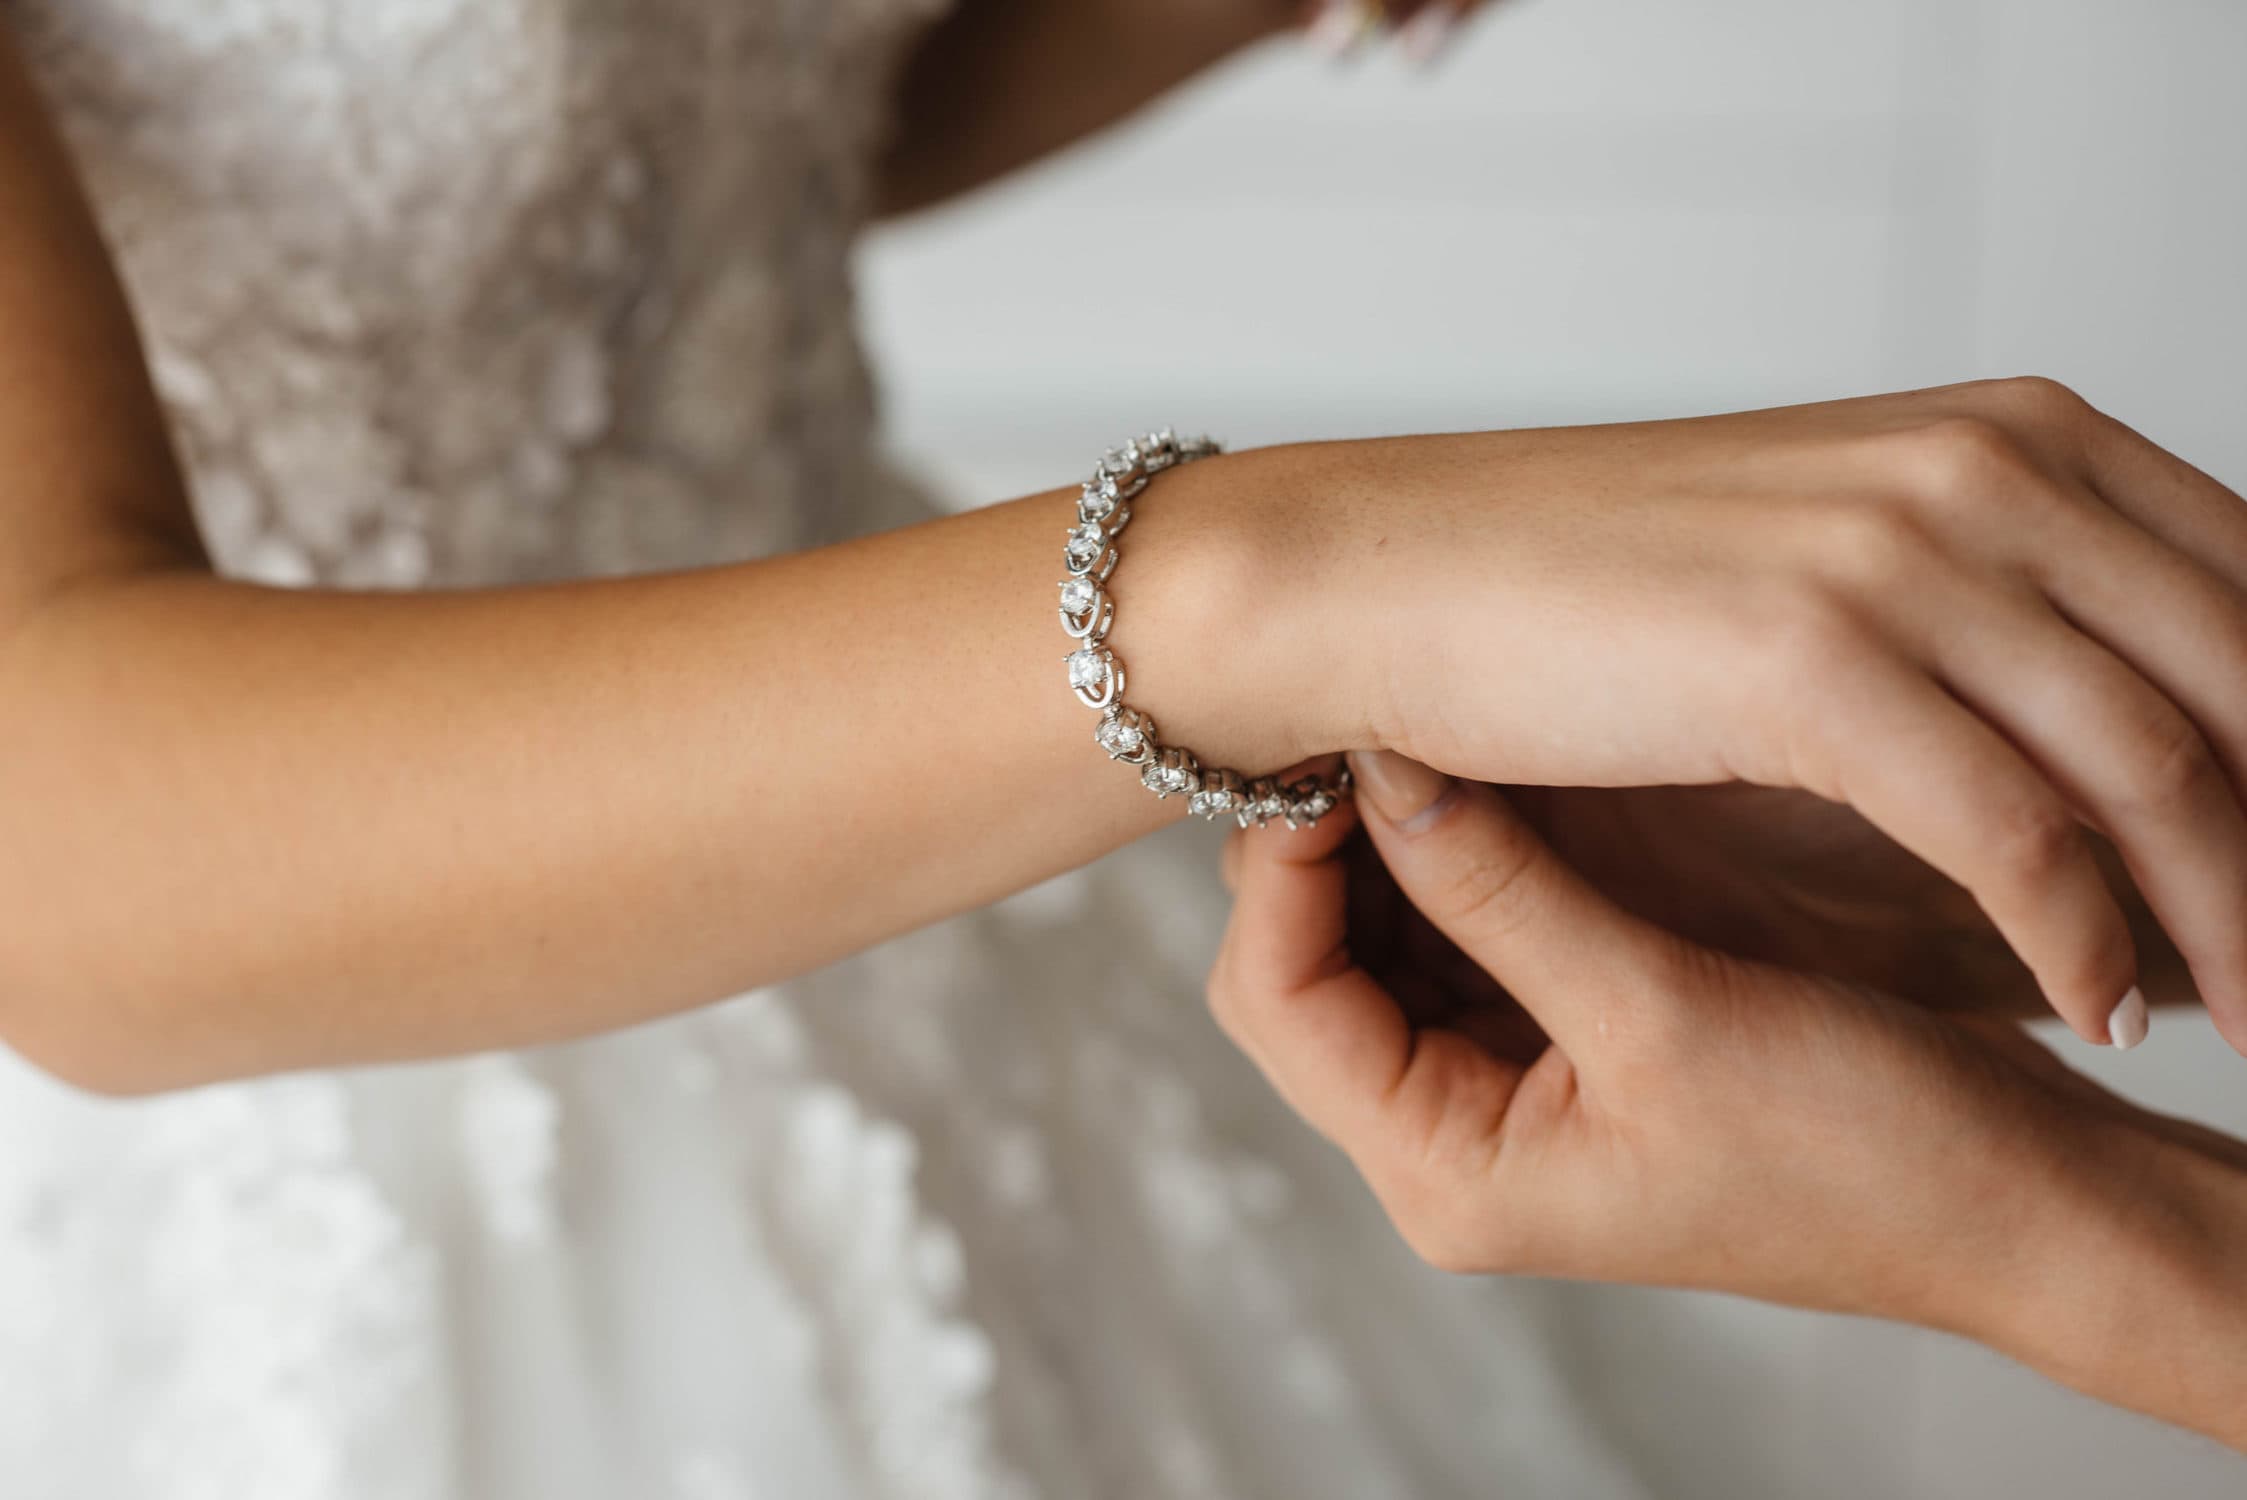 The,Bride,Is,Wearing,A,Bracelet,On,Her,Arm.,Wedding